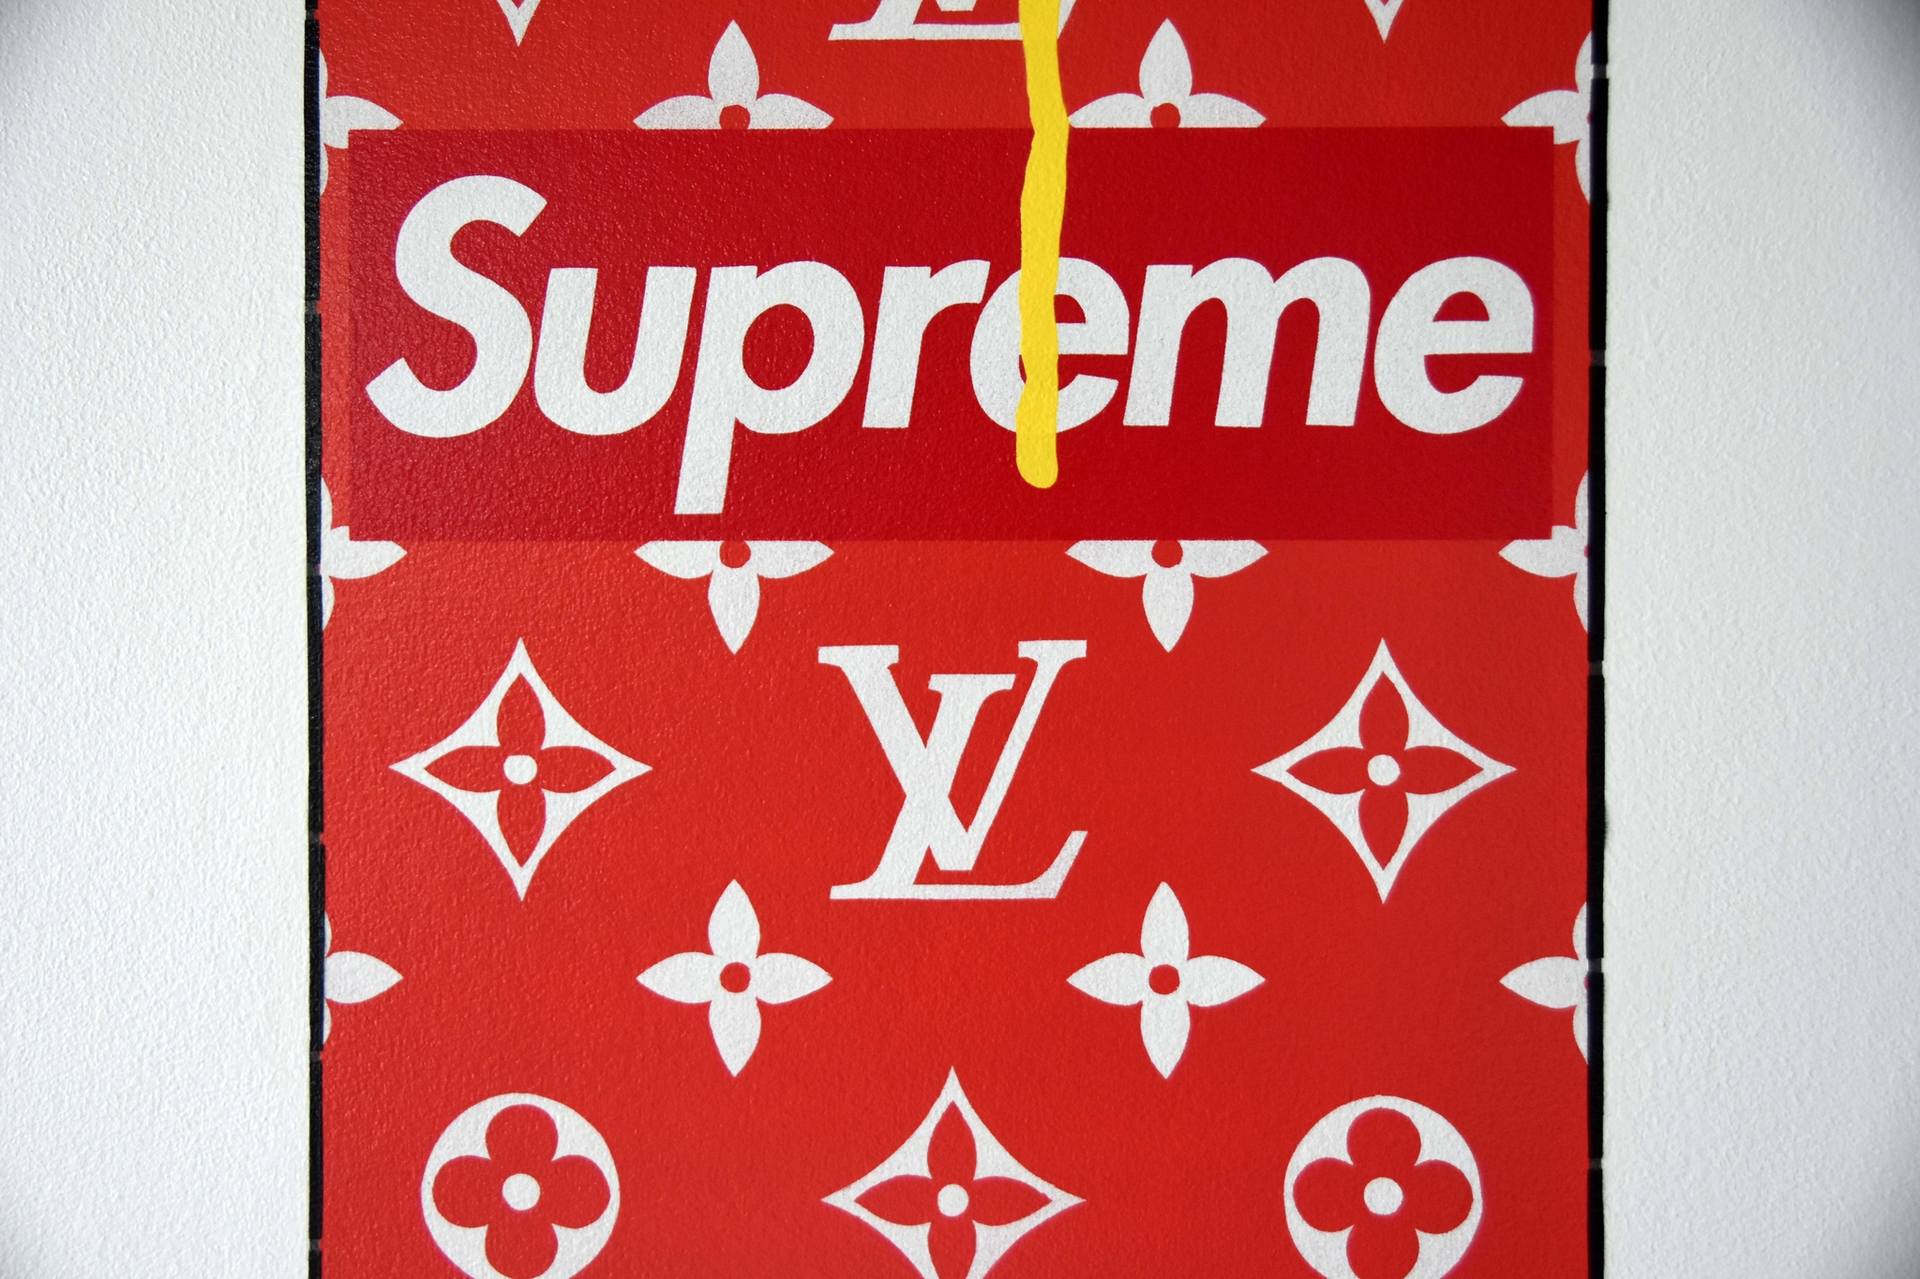 EPIC LOUIS VUITTON MONOGRAM LV DRIPPING CANVAS PAINTING!